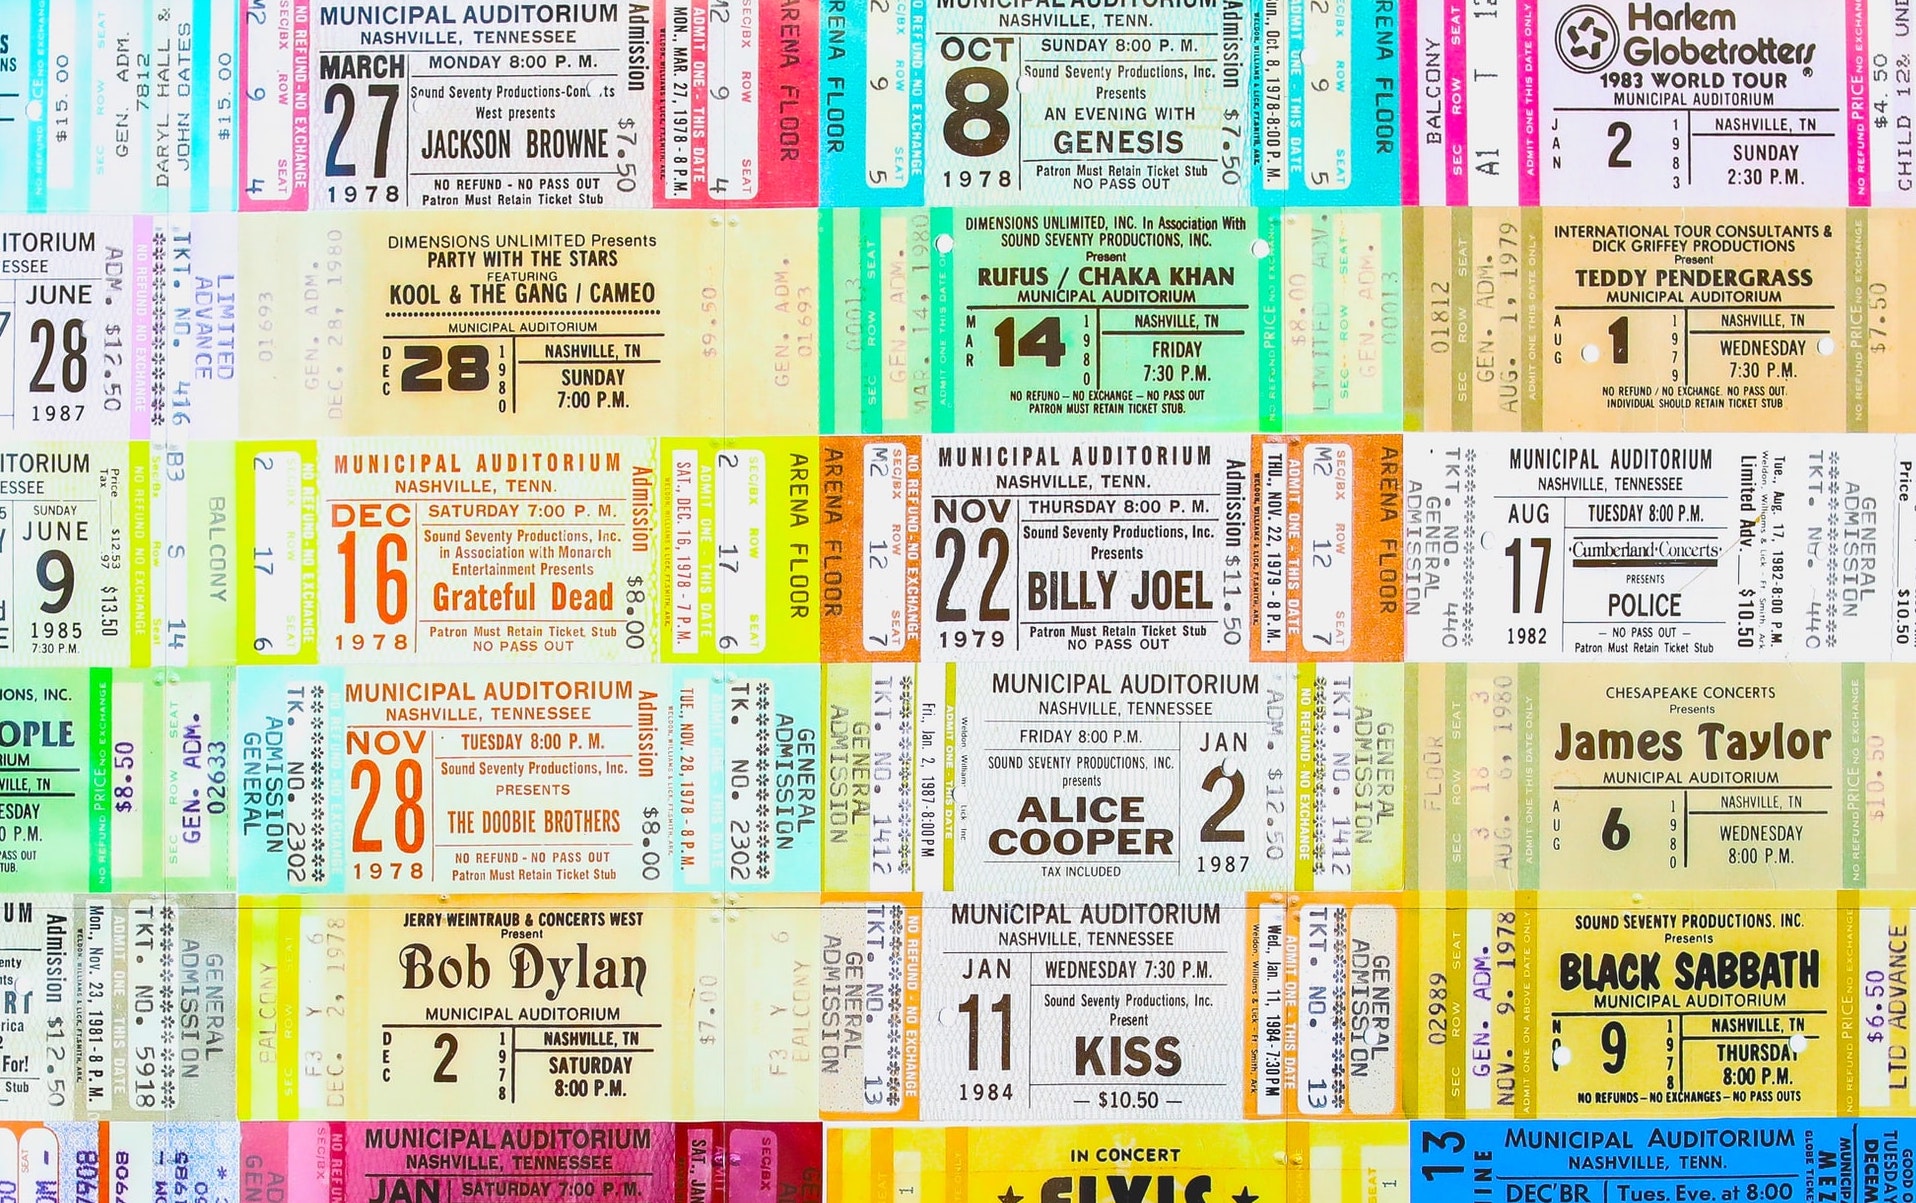 tickets from different concerts in Nashville, TN